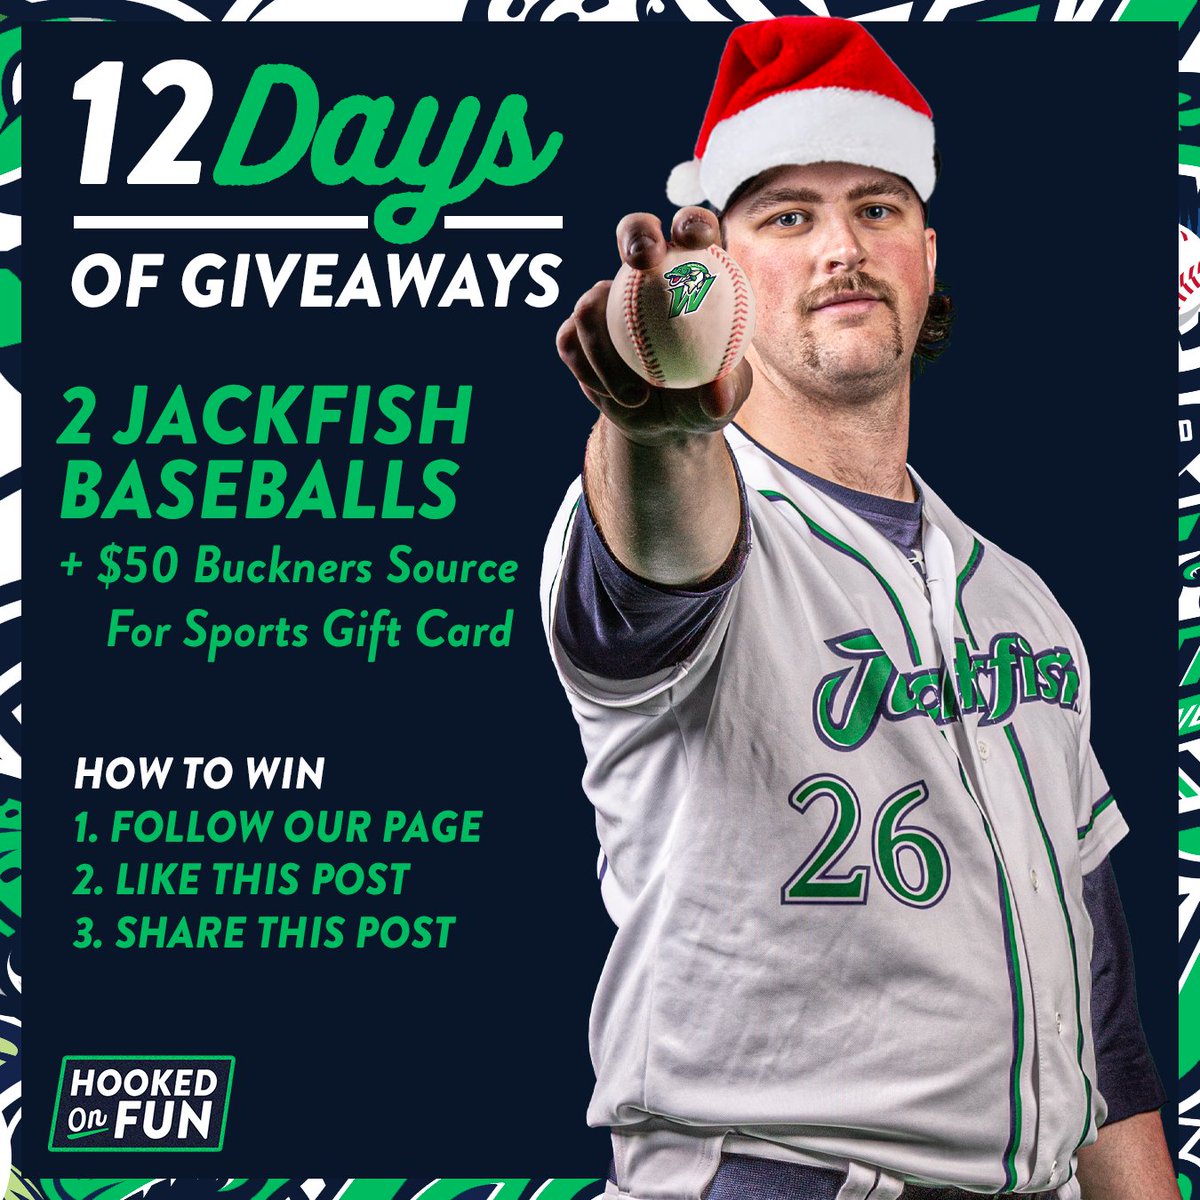 Nothing like a Scotty G handlebar stache to get you fired up for Day 5! 👨 Win two Jackfish logo baseballs and a $50 Buckner's Source for Sports Gift Card! 🎁 1. Follow us 2. Like this post 3. Share this post Winner to be announced at 3pm